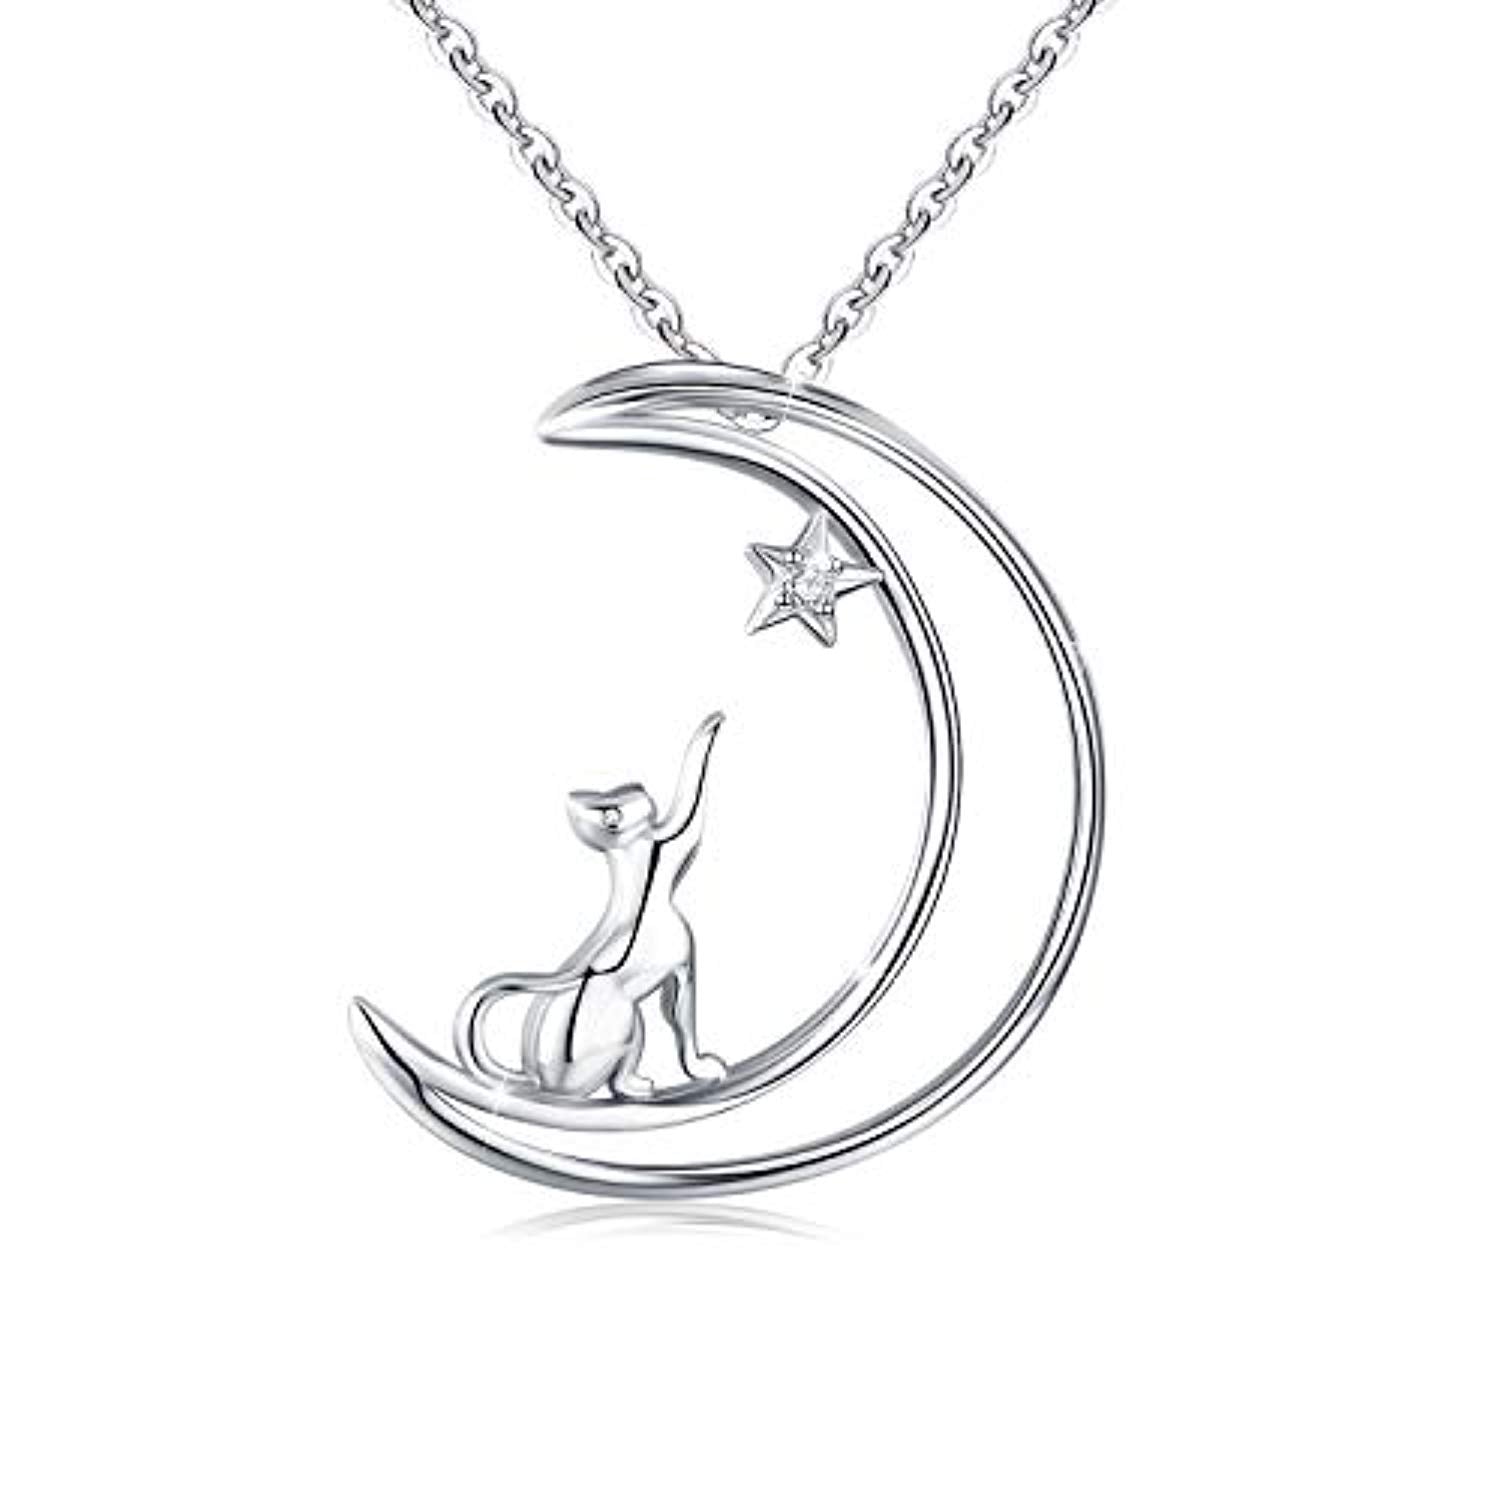 Sterling Silver Cat Opal  Necklace Cat on Crescent Moon Pendant Necklace Jewelry Gifts for Women